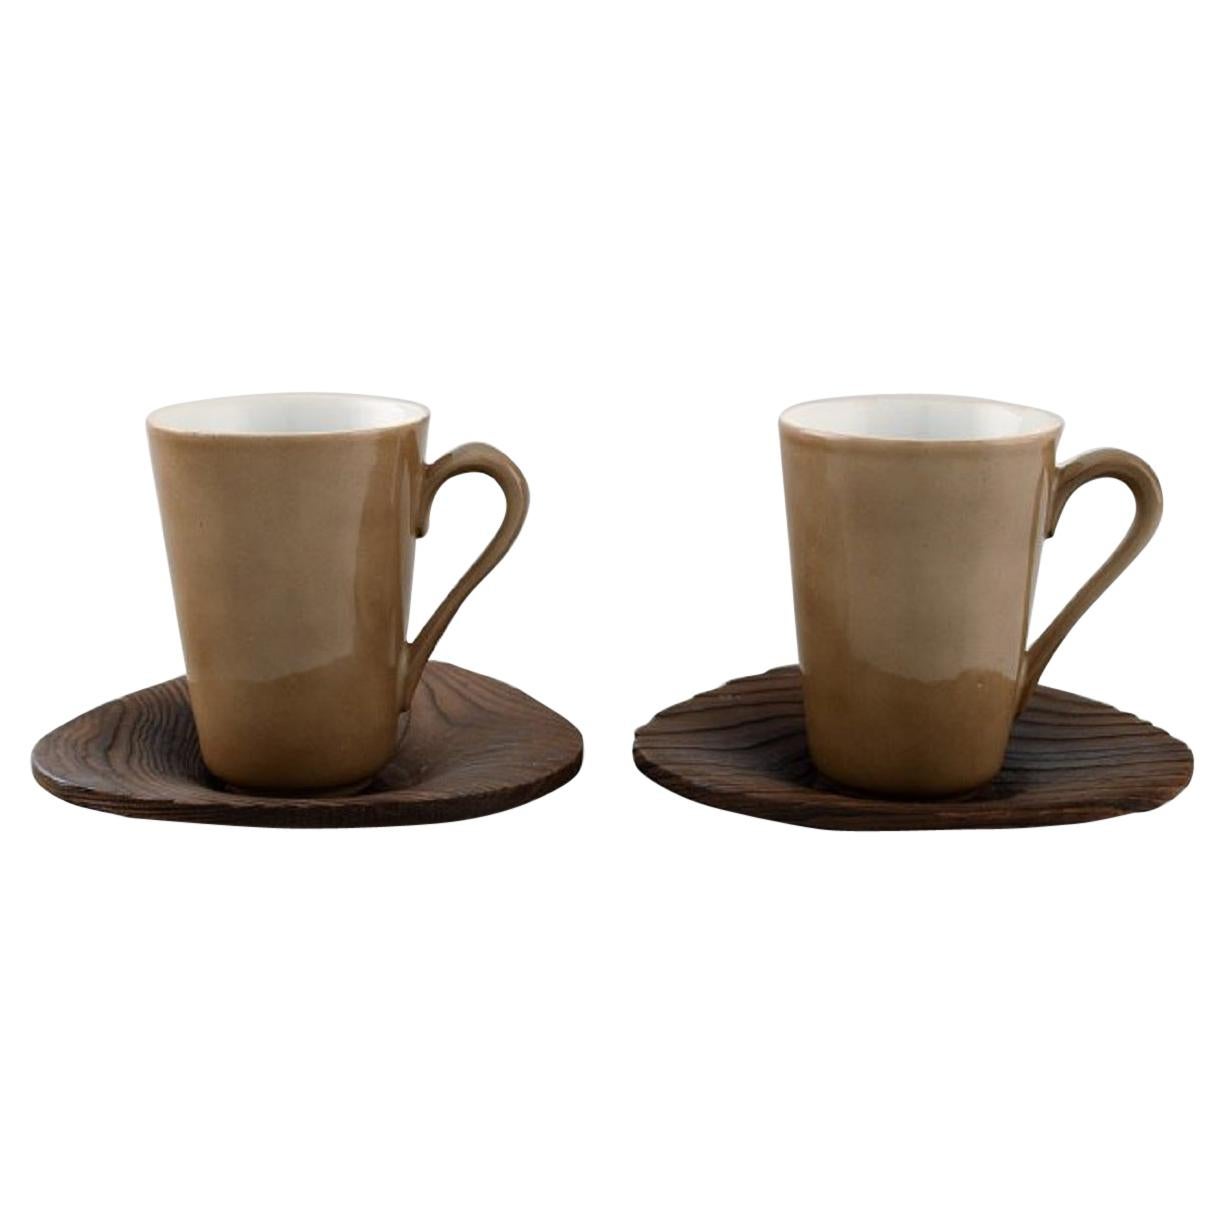 Kenji Fujita for Tackett Associates, Two Porcelain Coffee Cups with Saucers For Sale